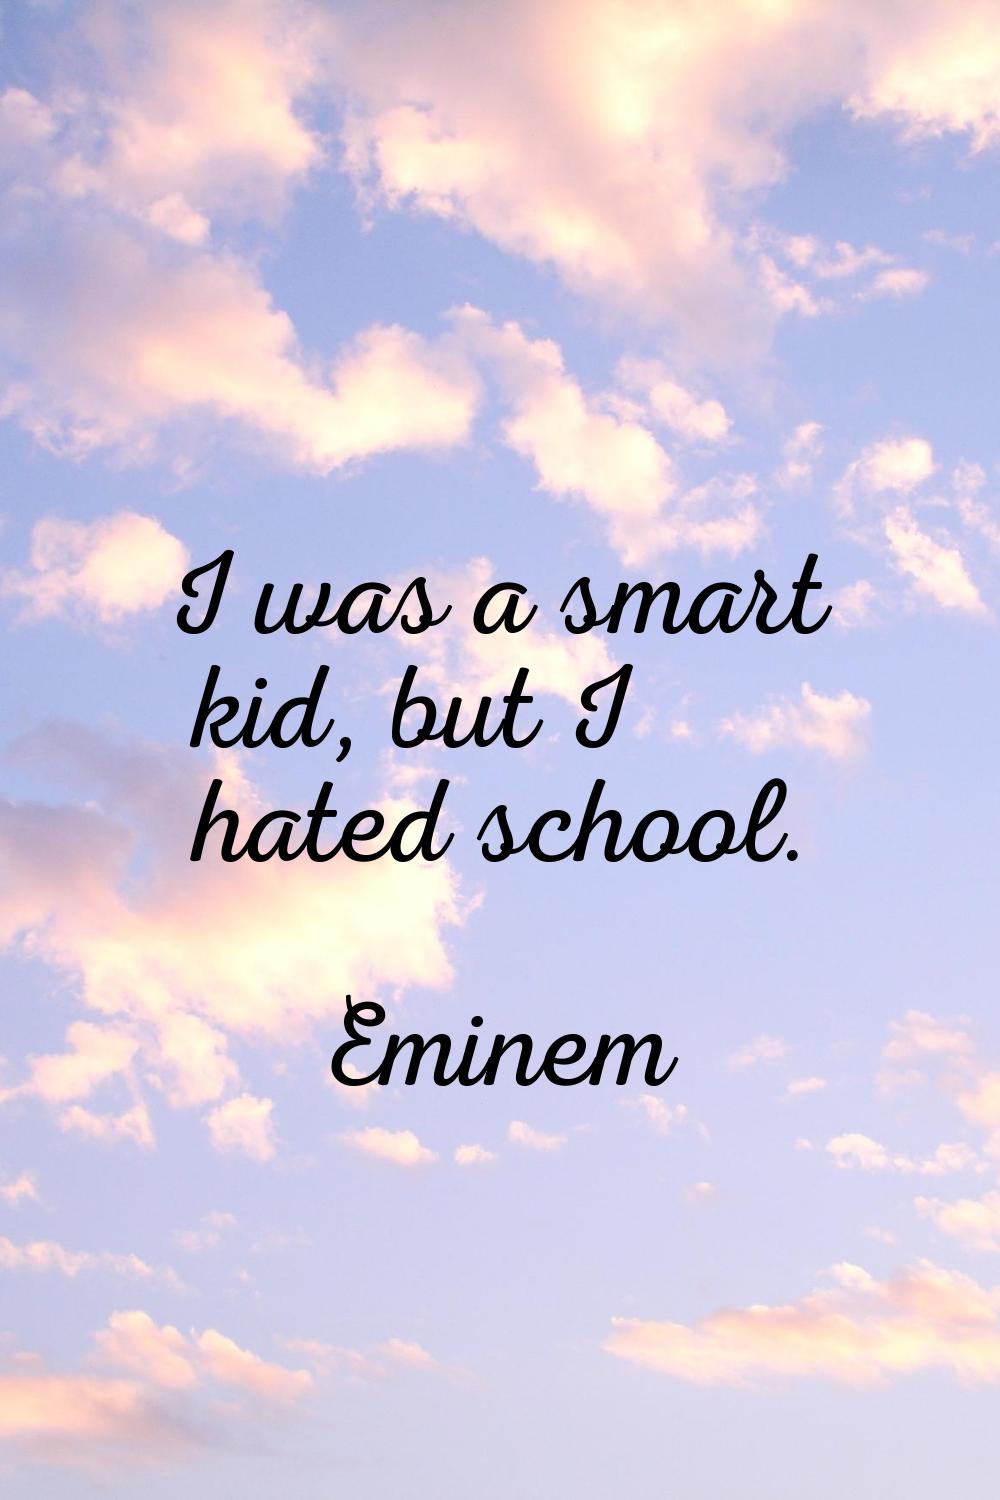 I was a smart kid, but I hated school.